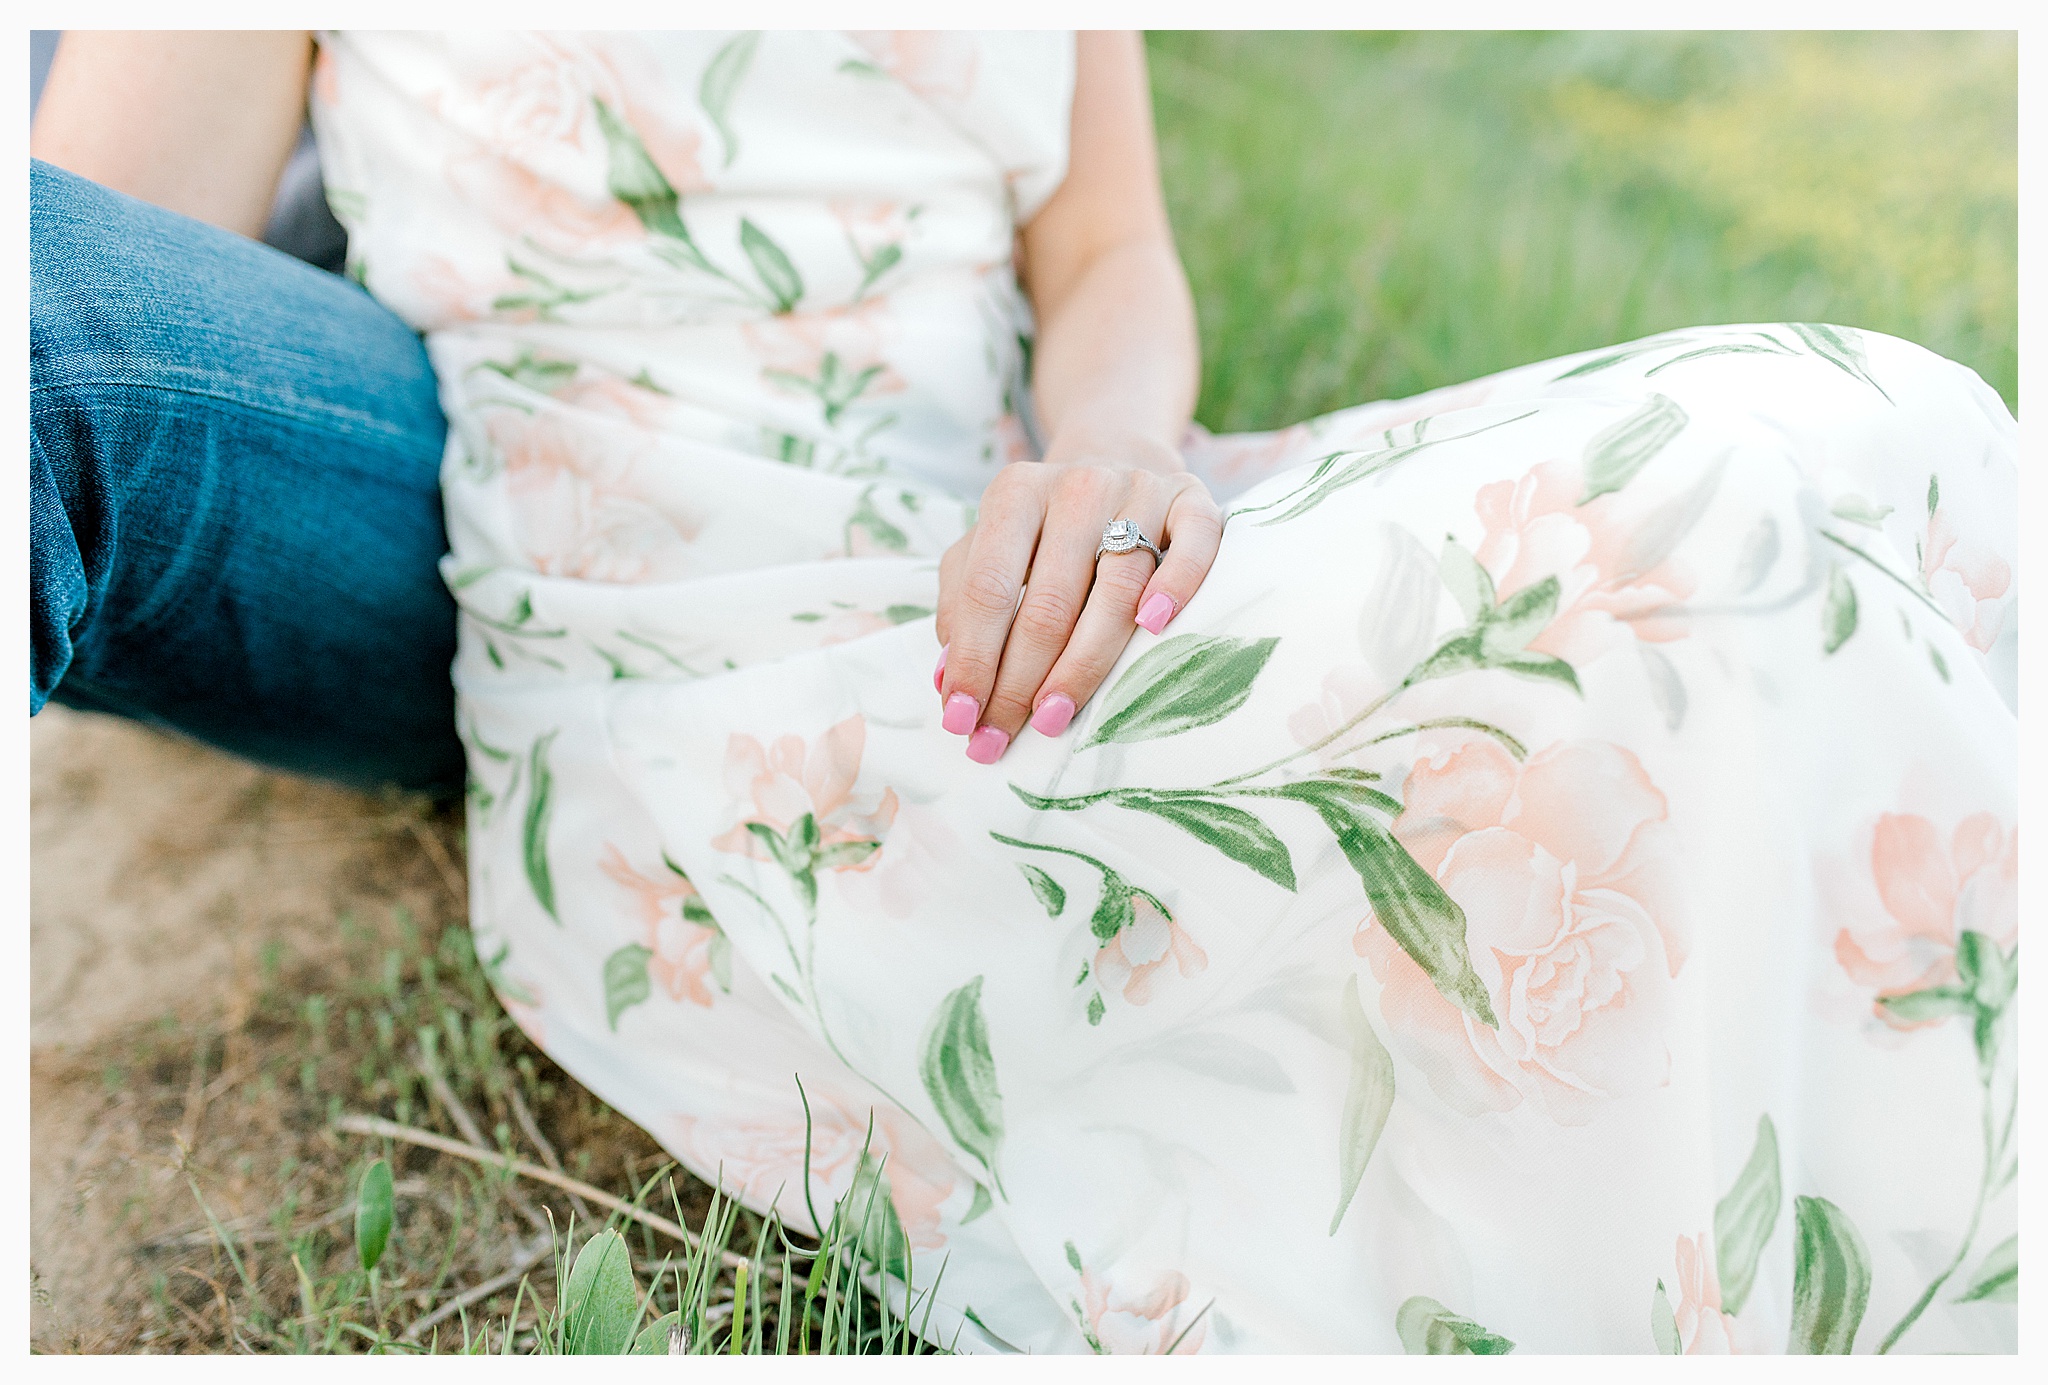 Engagement session amongst the wildflowers in Wenatchee, Washington | Engagement Session Outfit Inspiration for Wedding Photography with Emma Rose Company | Light and Airy PNW Photographer, Seattle Bride_0027.jpg